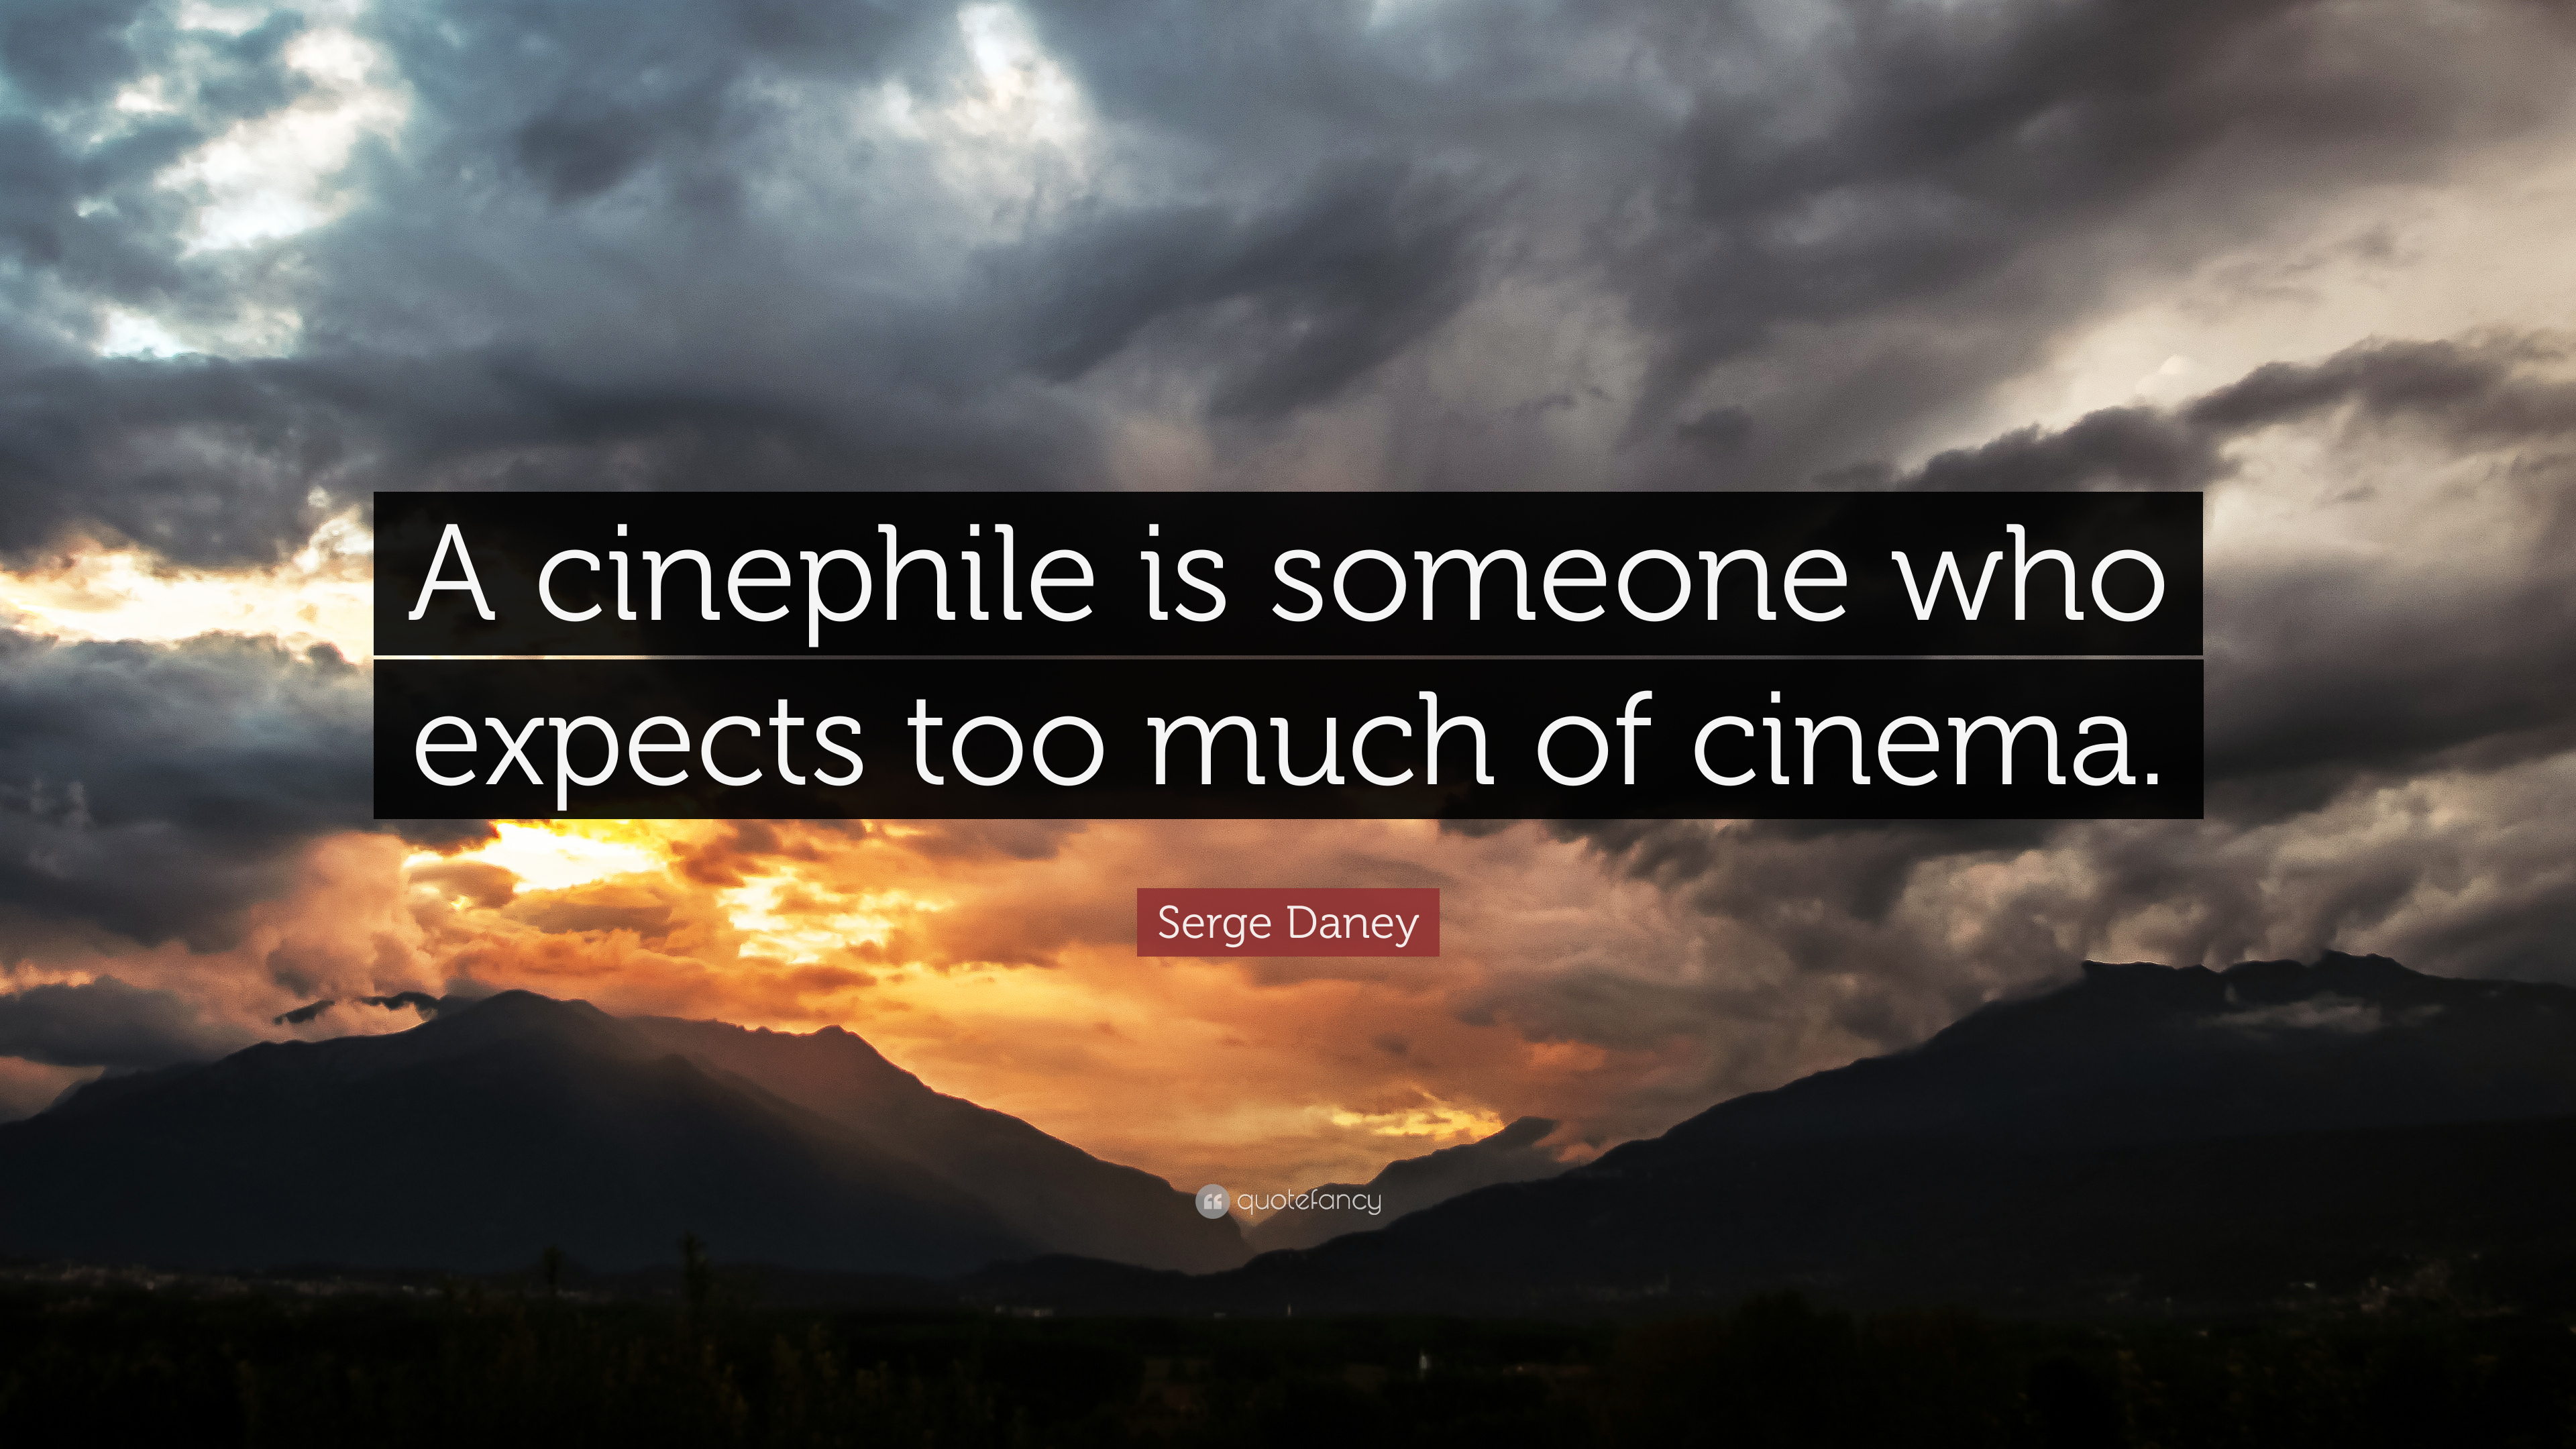 Serge Daney Quote: "A cinephile is someone who expects too much of cin...